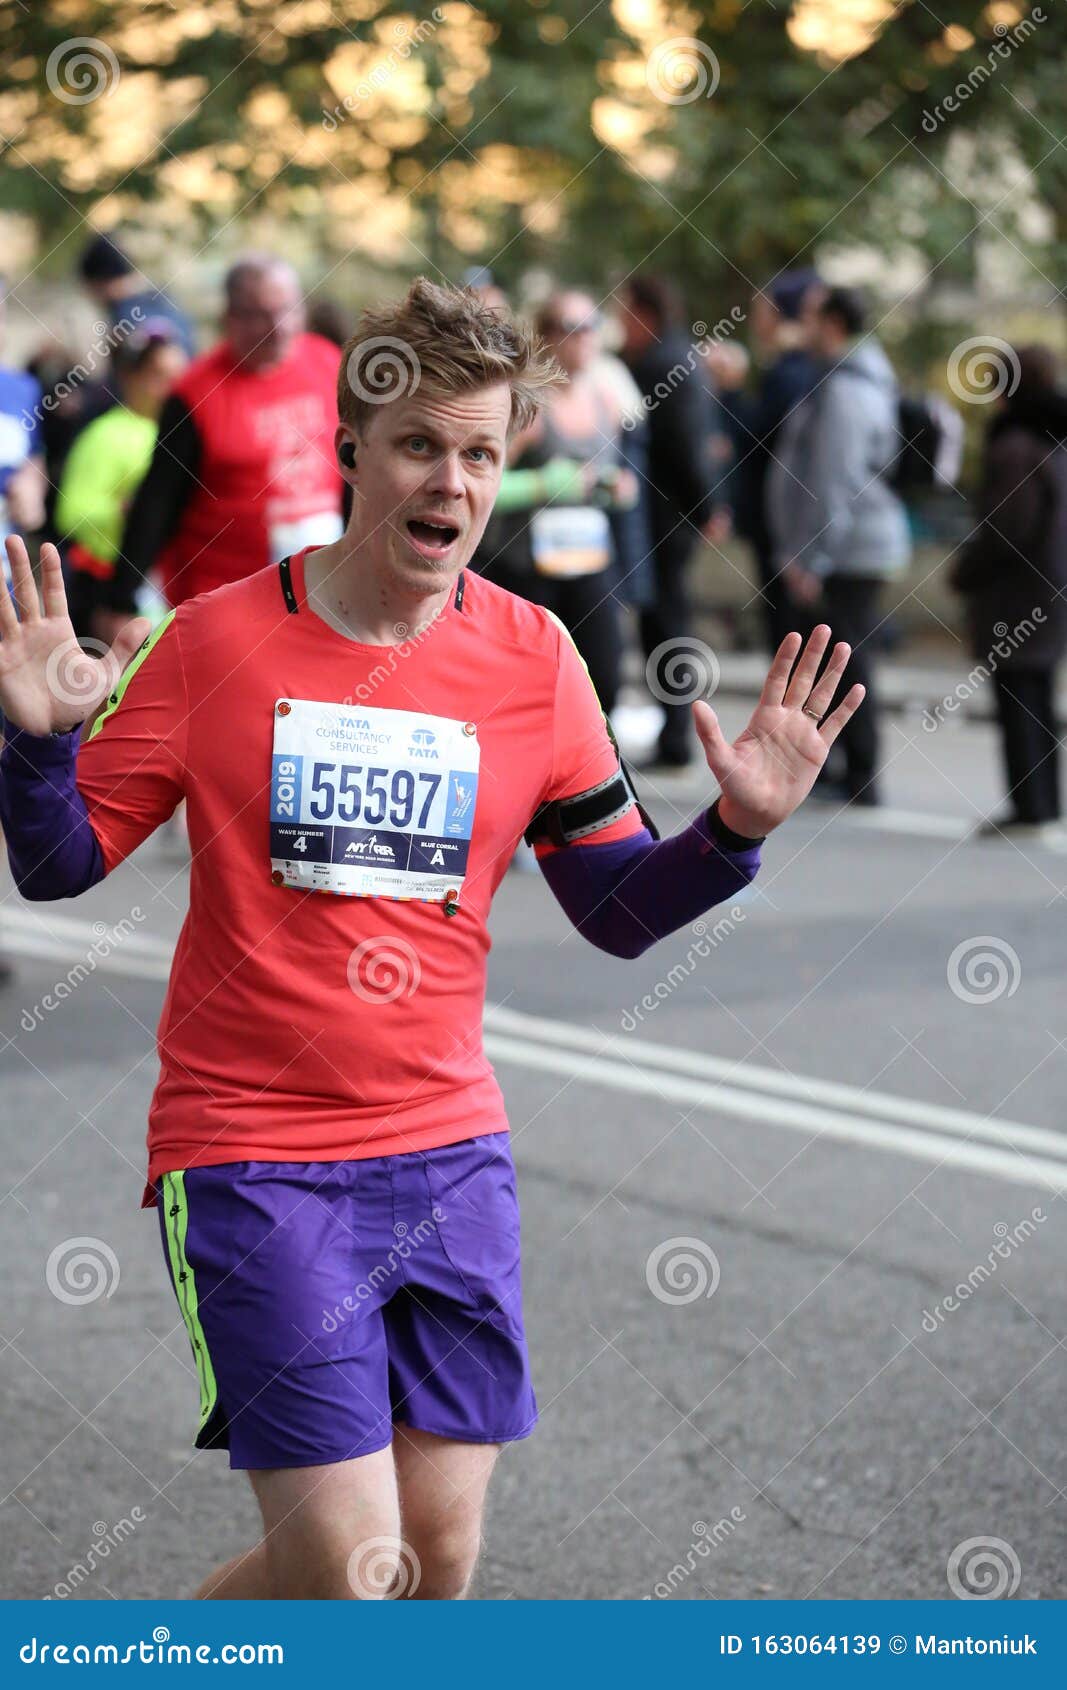 Marathon NYC 2019 Sport Event in Central Park Editorial Stock Image